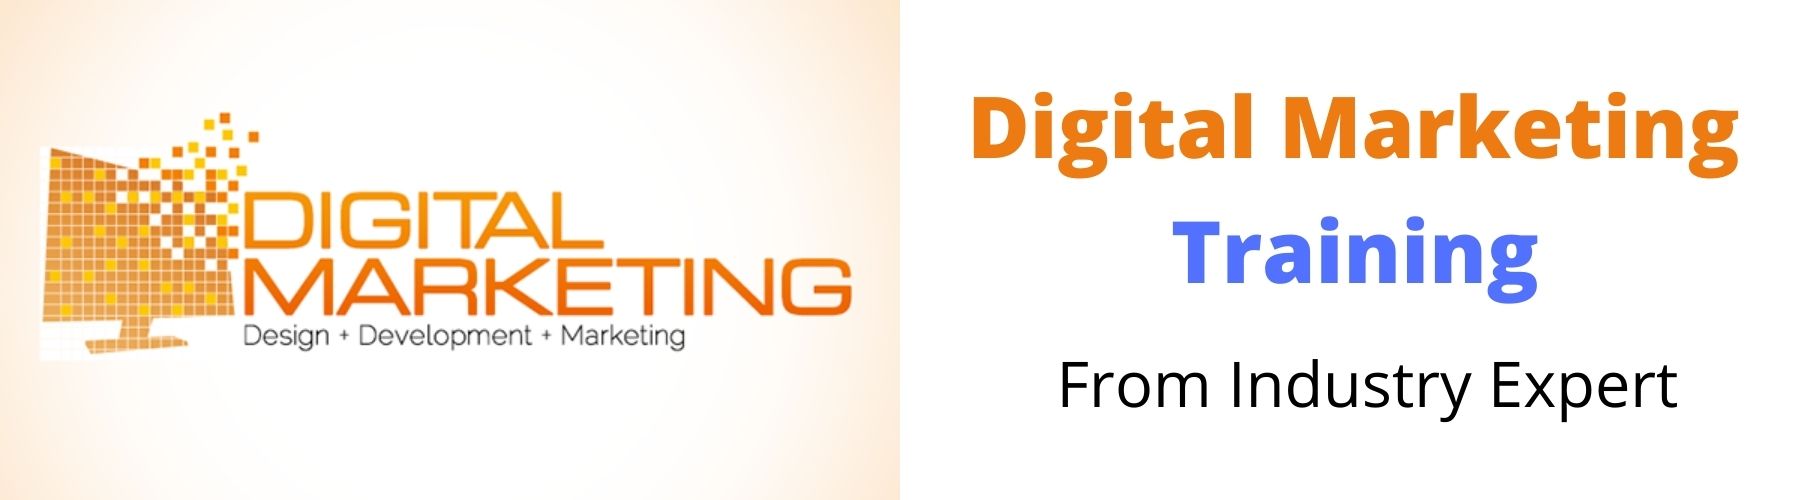 Digital Marketing Training from Industry Experts